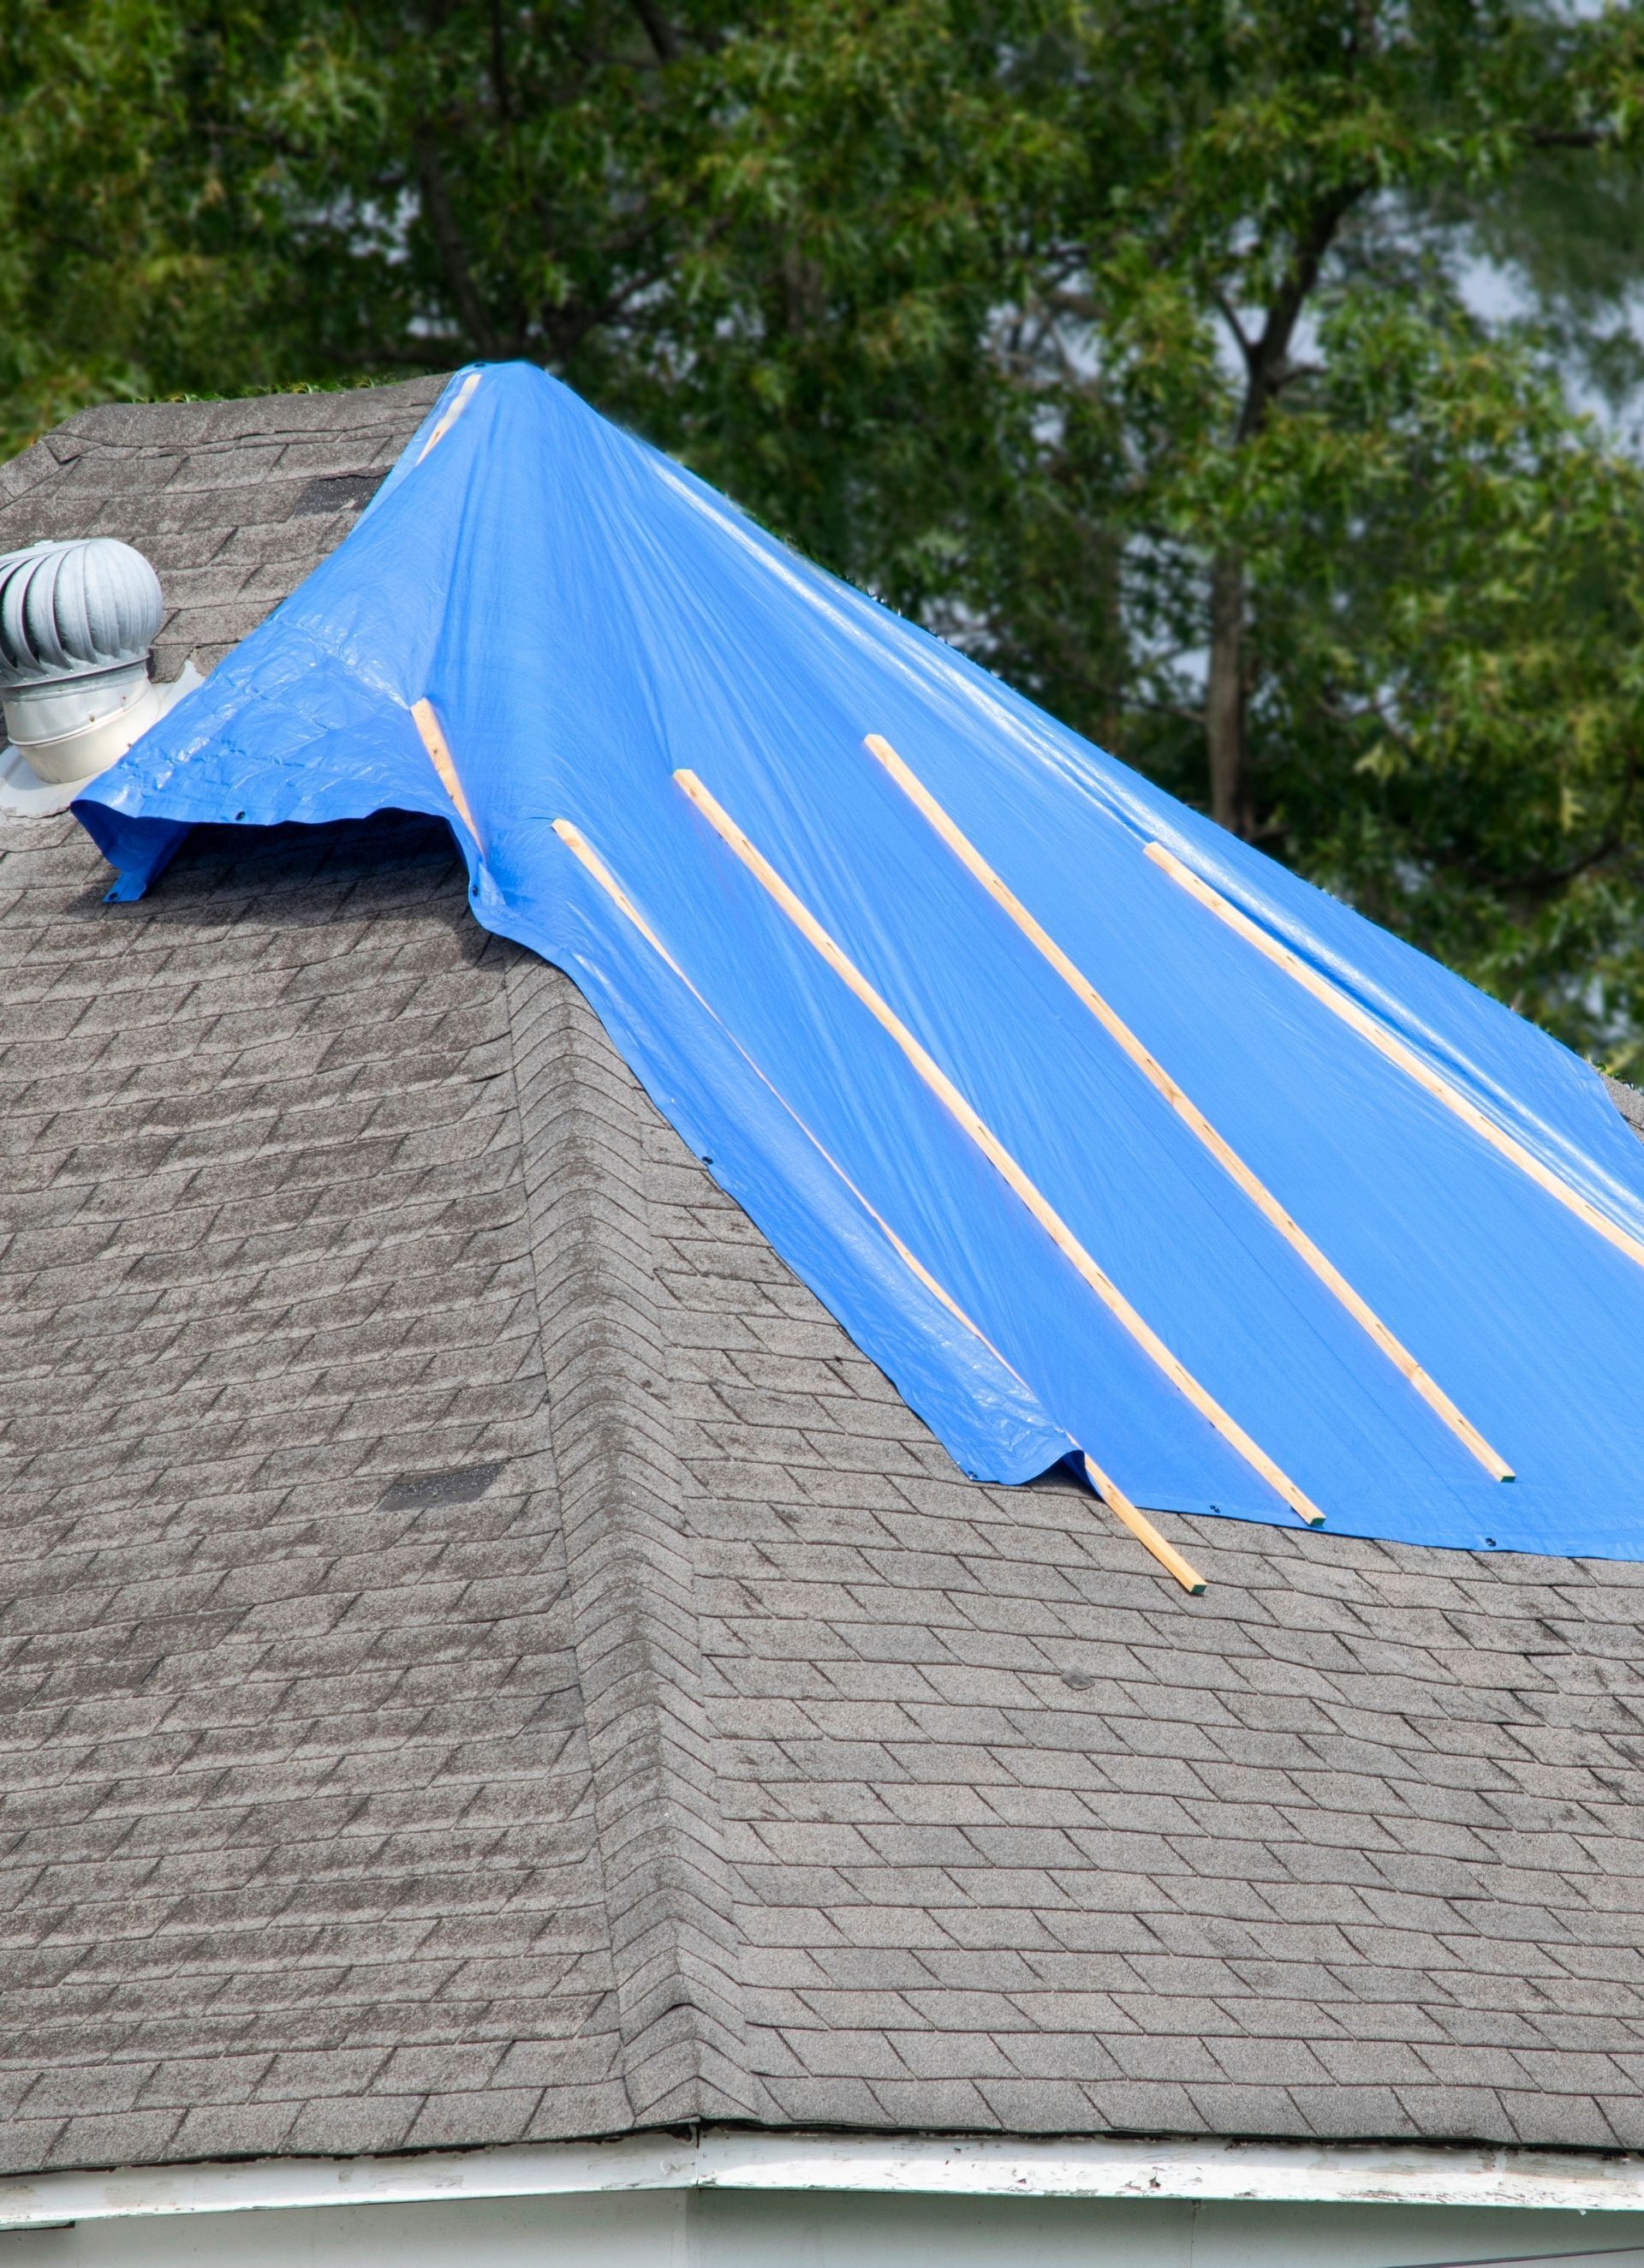 house roof with blue tarp on it